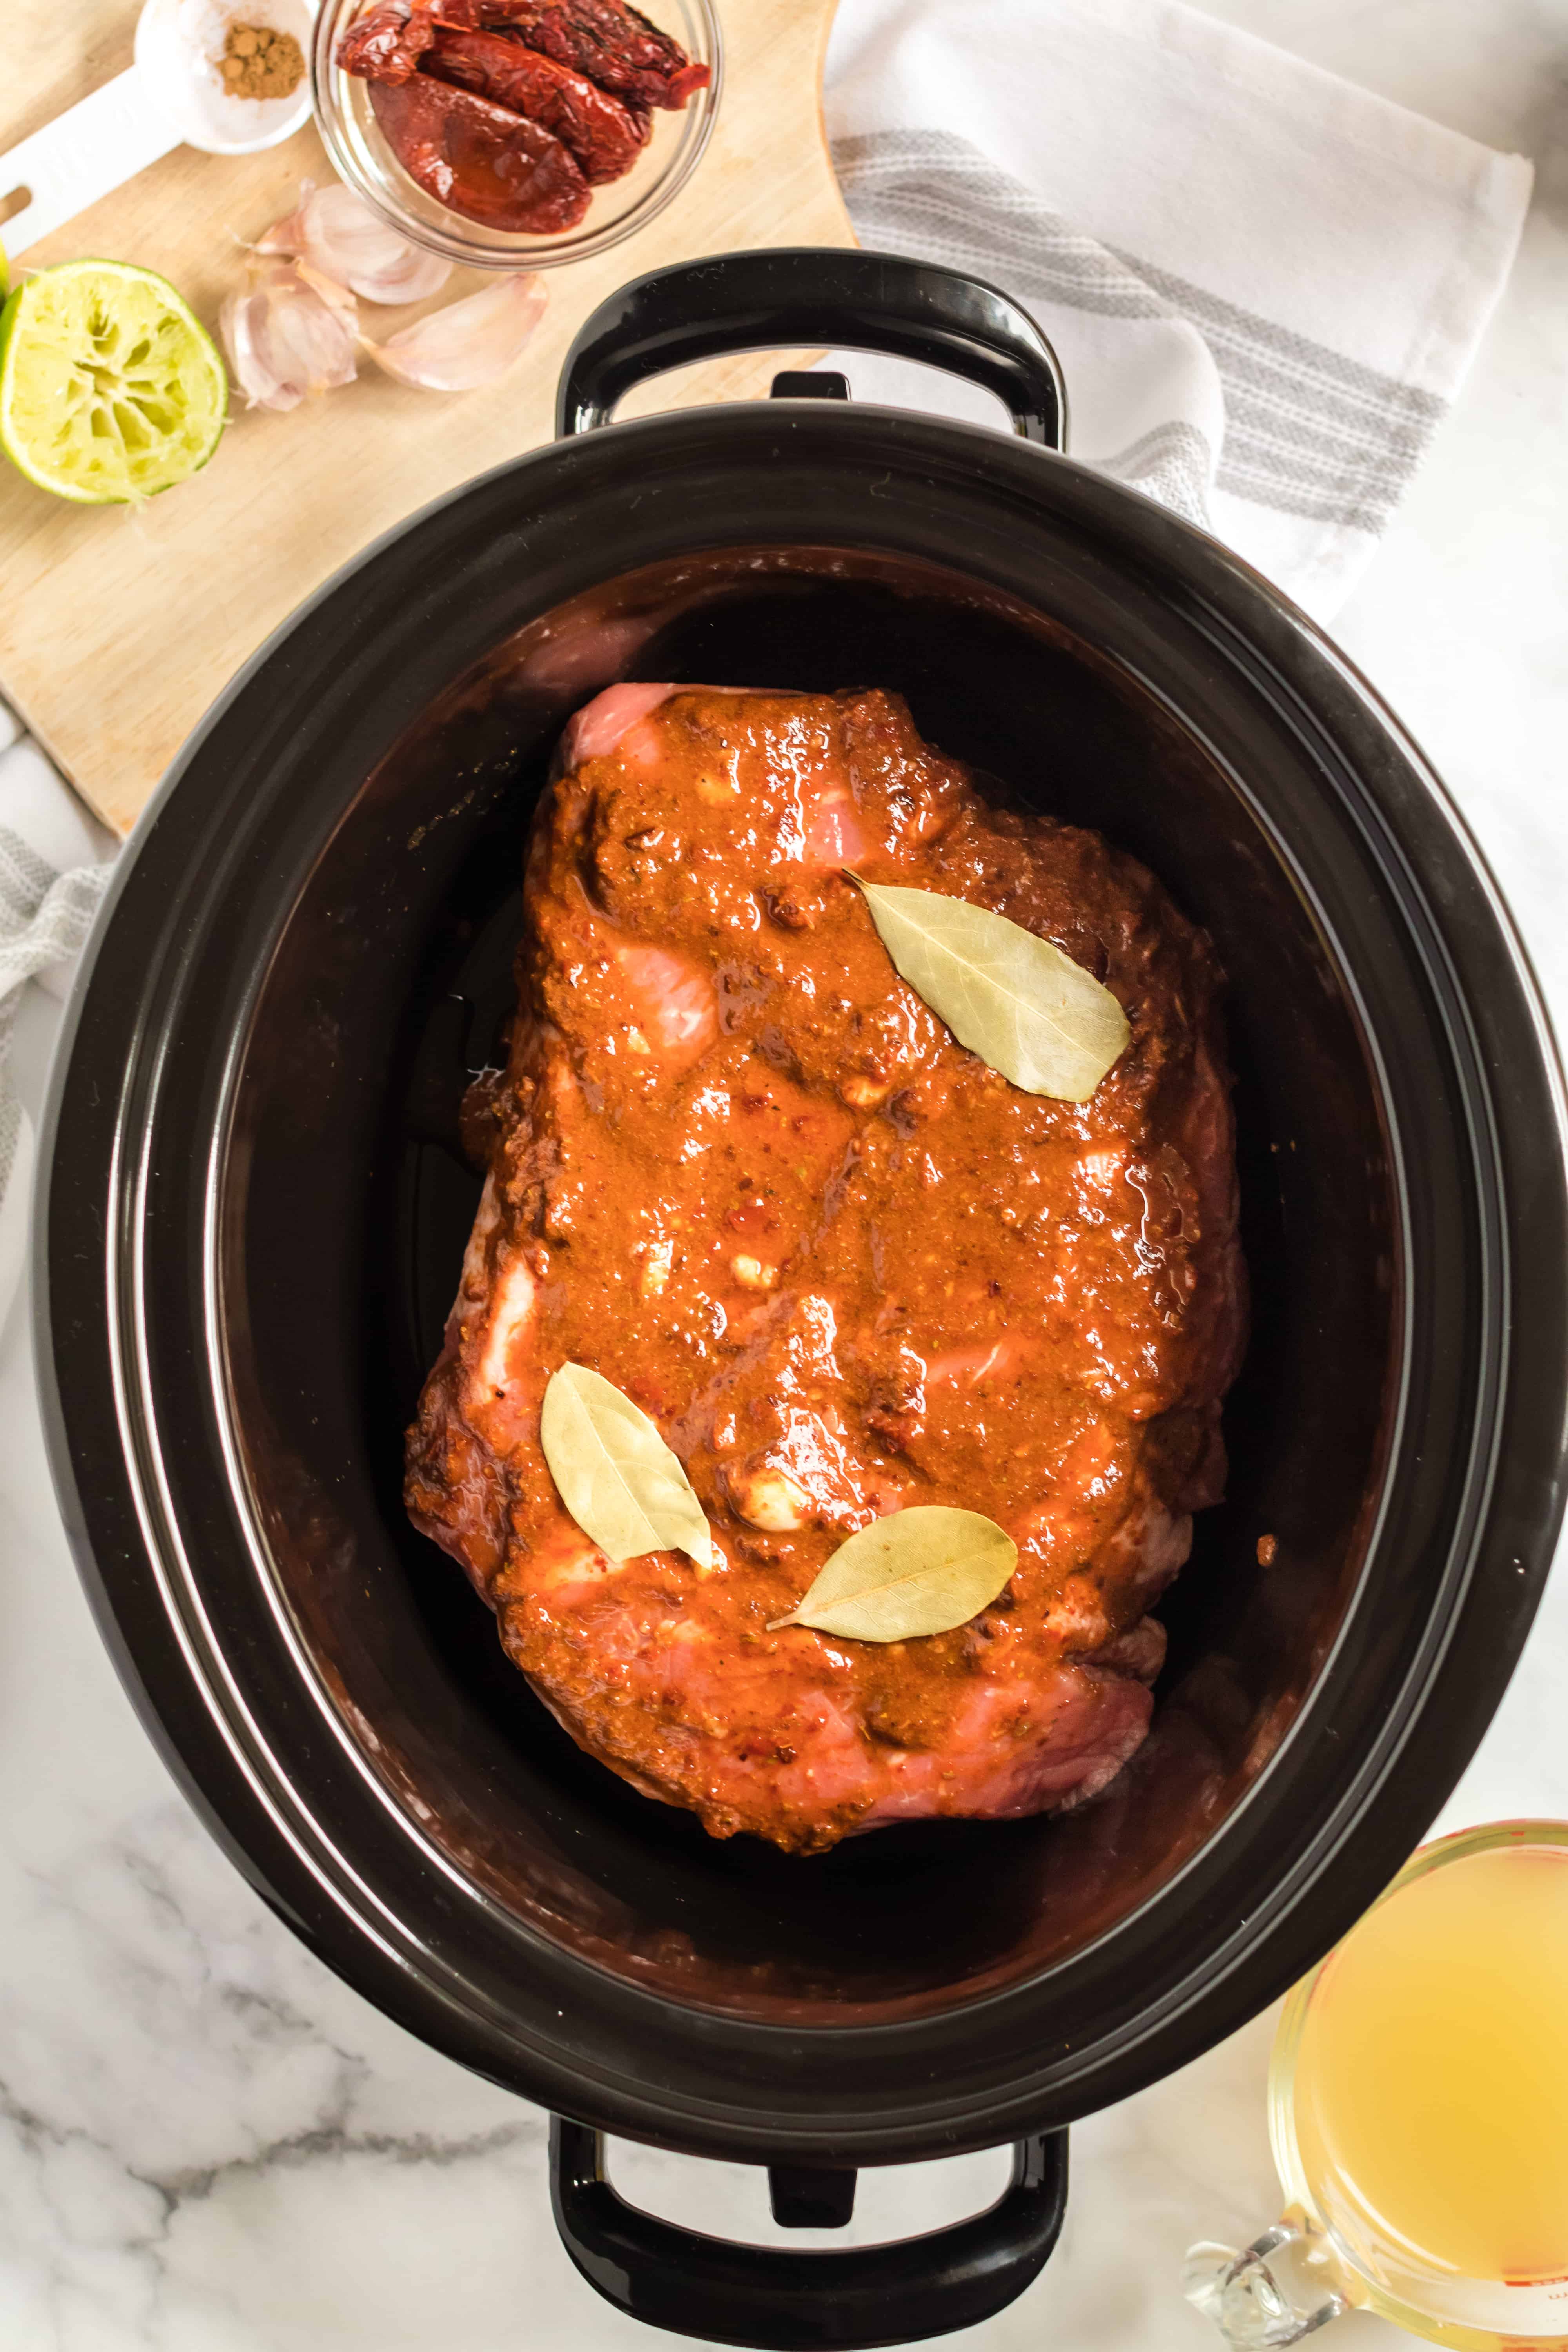 Crockpot with large cut of chuck steak topped with barbacoa sauce and bay leaves.